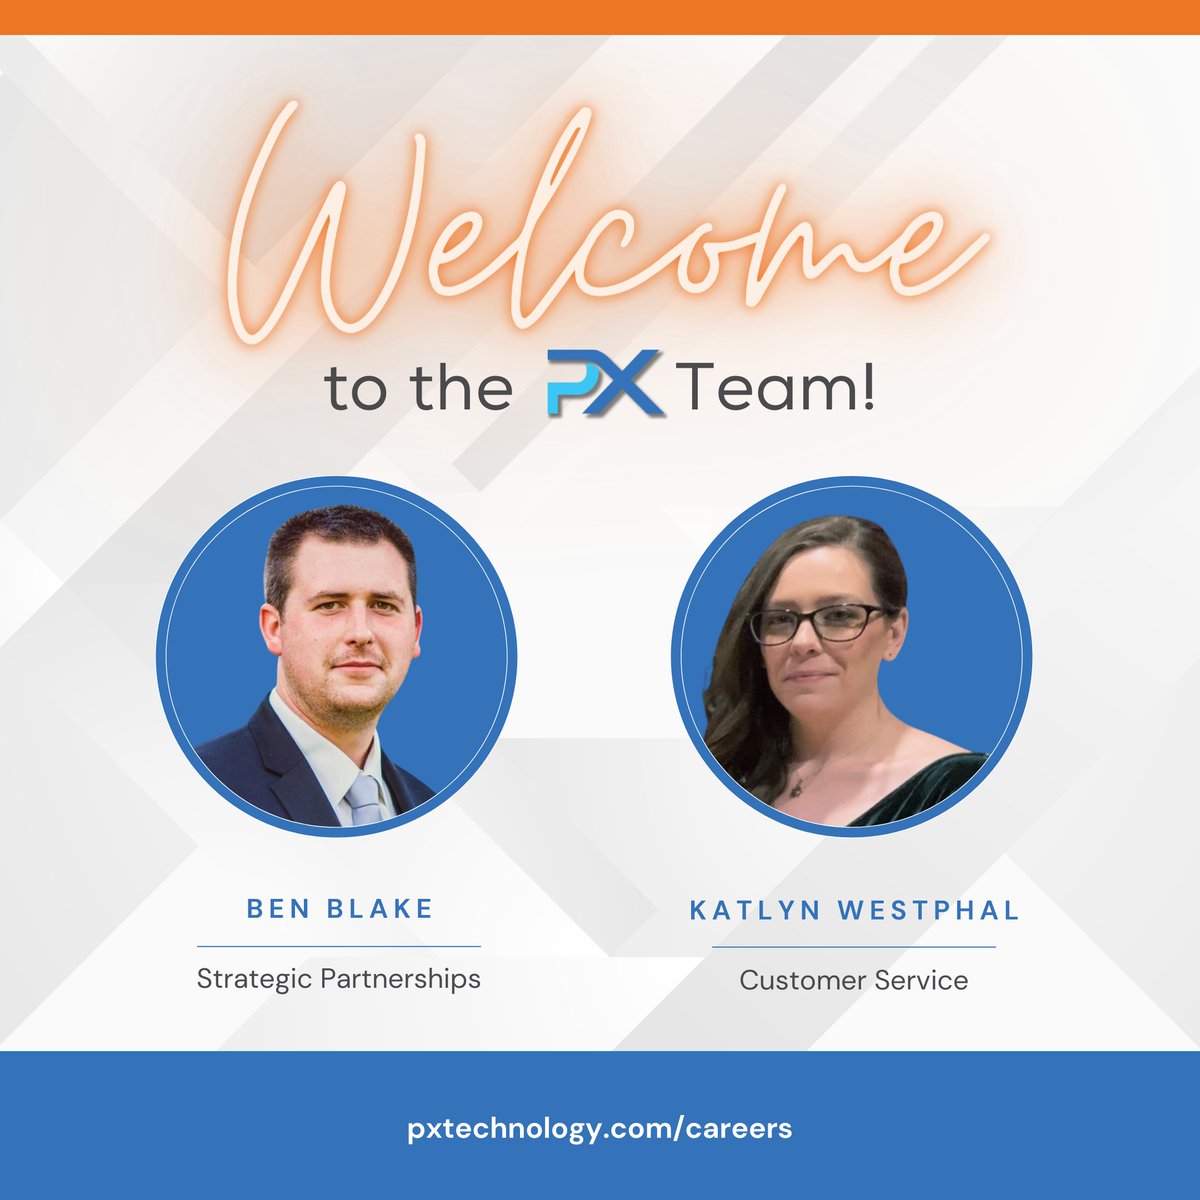 We're excited to welcome Benjamin Blake and Katlyn Westphal to our team at PX Technology! As we continue to enhance our solutions and expand our reach to medical partners and practices nationwide, we're grateful to have such talented professionals on board.